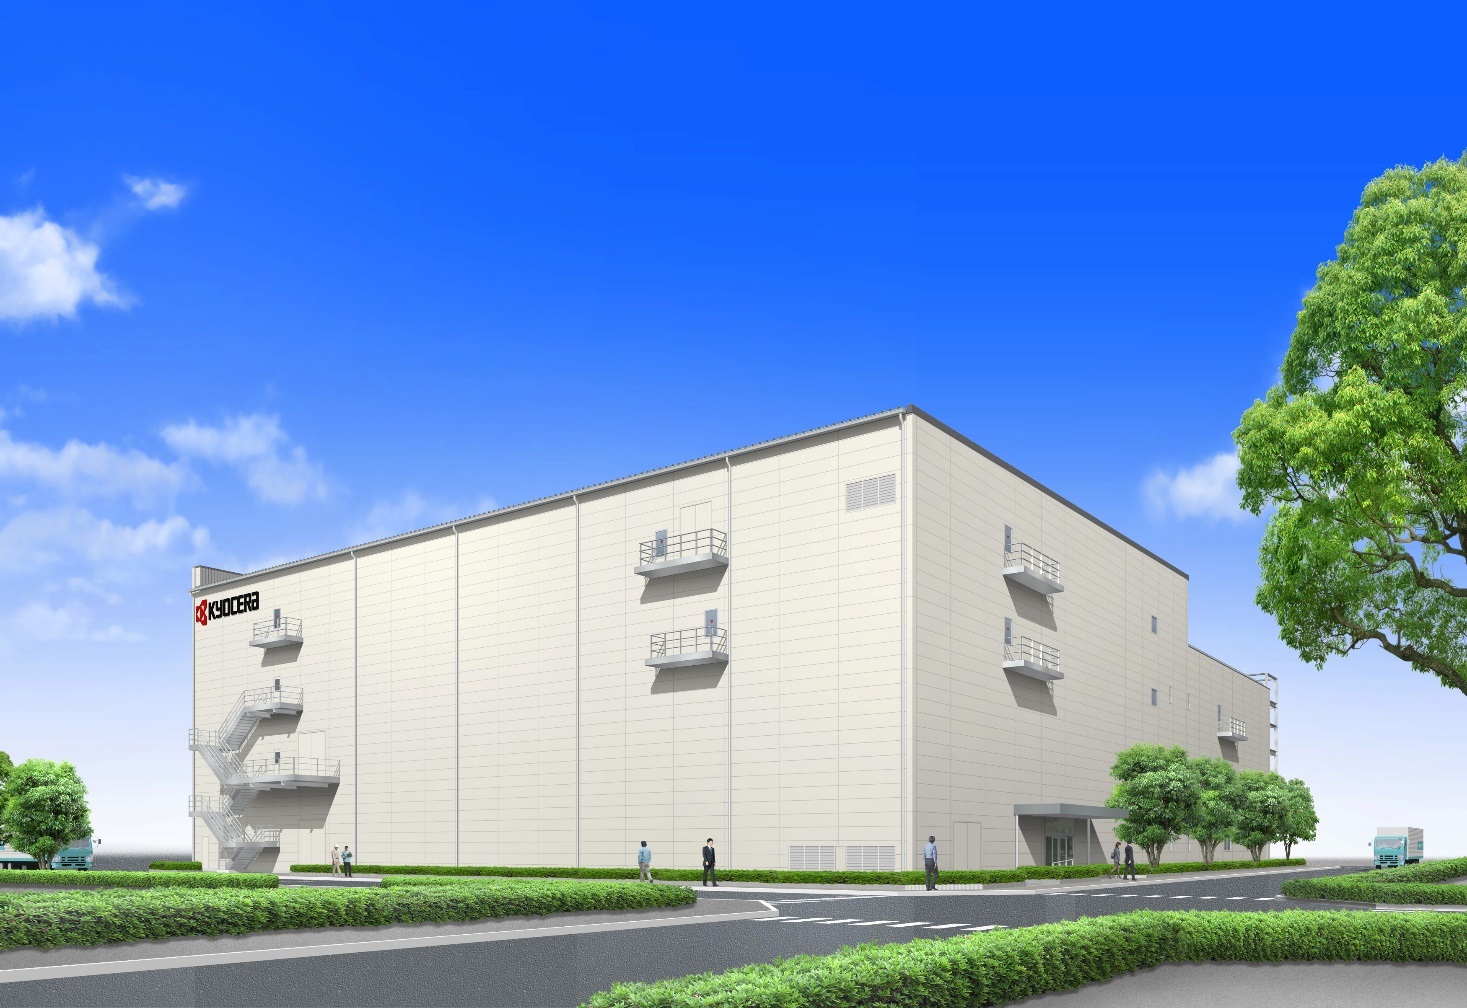 Kyocera_to_Build_New_Facility_in_Shiga__Japan_to_Produce_Automated_Equipment_for__Smart_Factory_.-cps-20096-Image.cpsimage.jpg